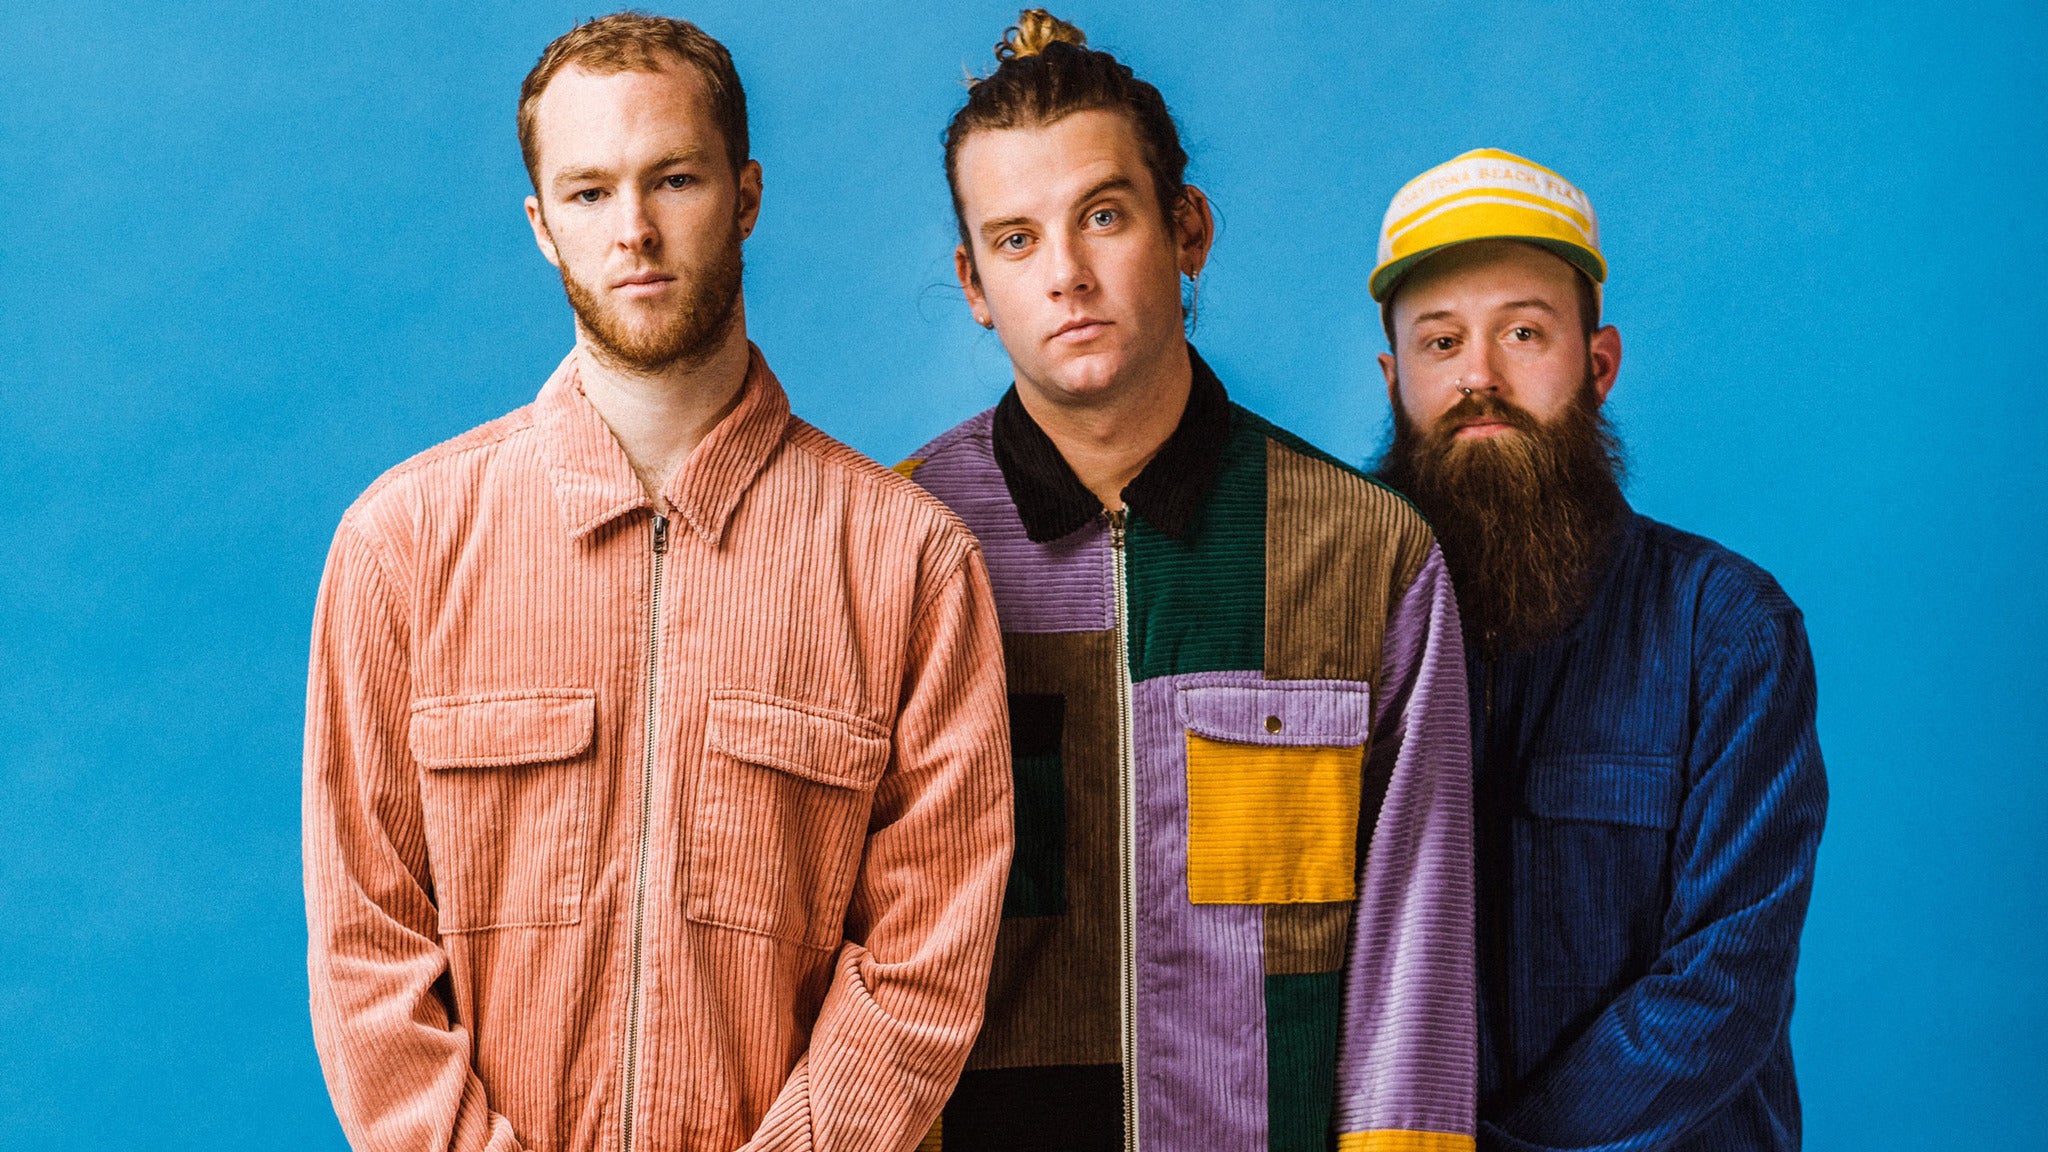 Judah & the Lion - Going to Mars Tour in Kansas City promo photo for Fan Club & VIP presale offer code